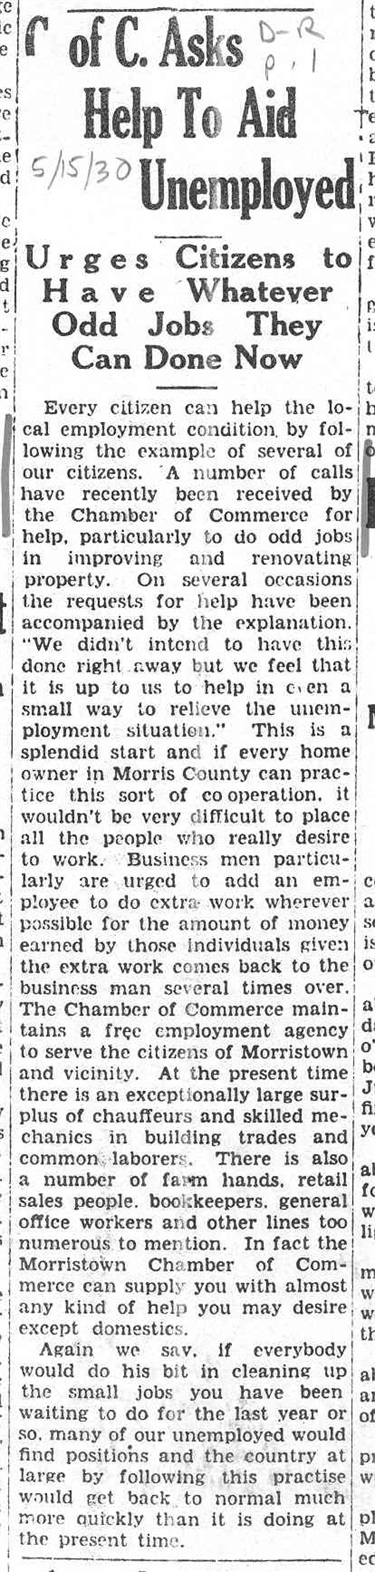 May 15, 1930: Chamber of Commerce Asks Help to Aid Unemployed